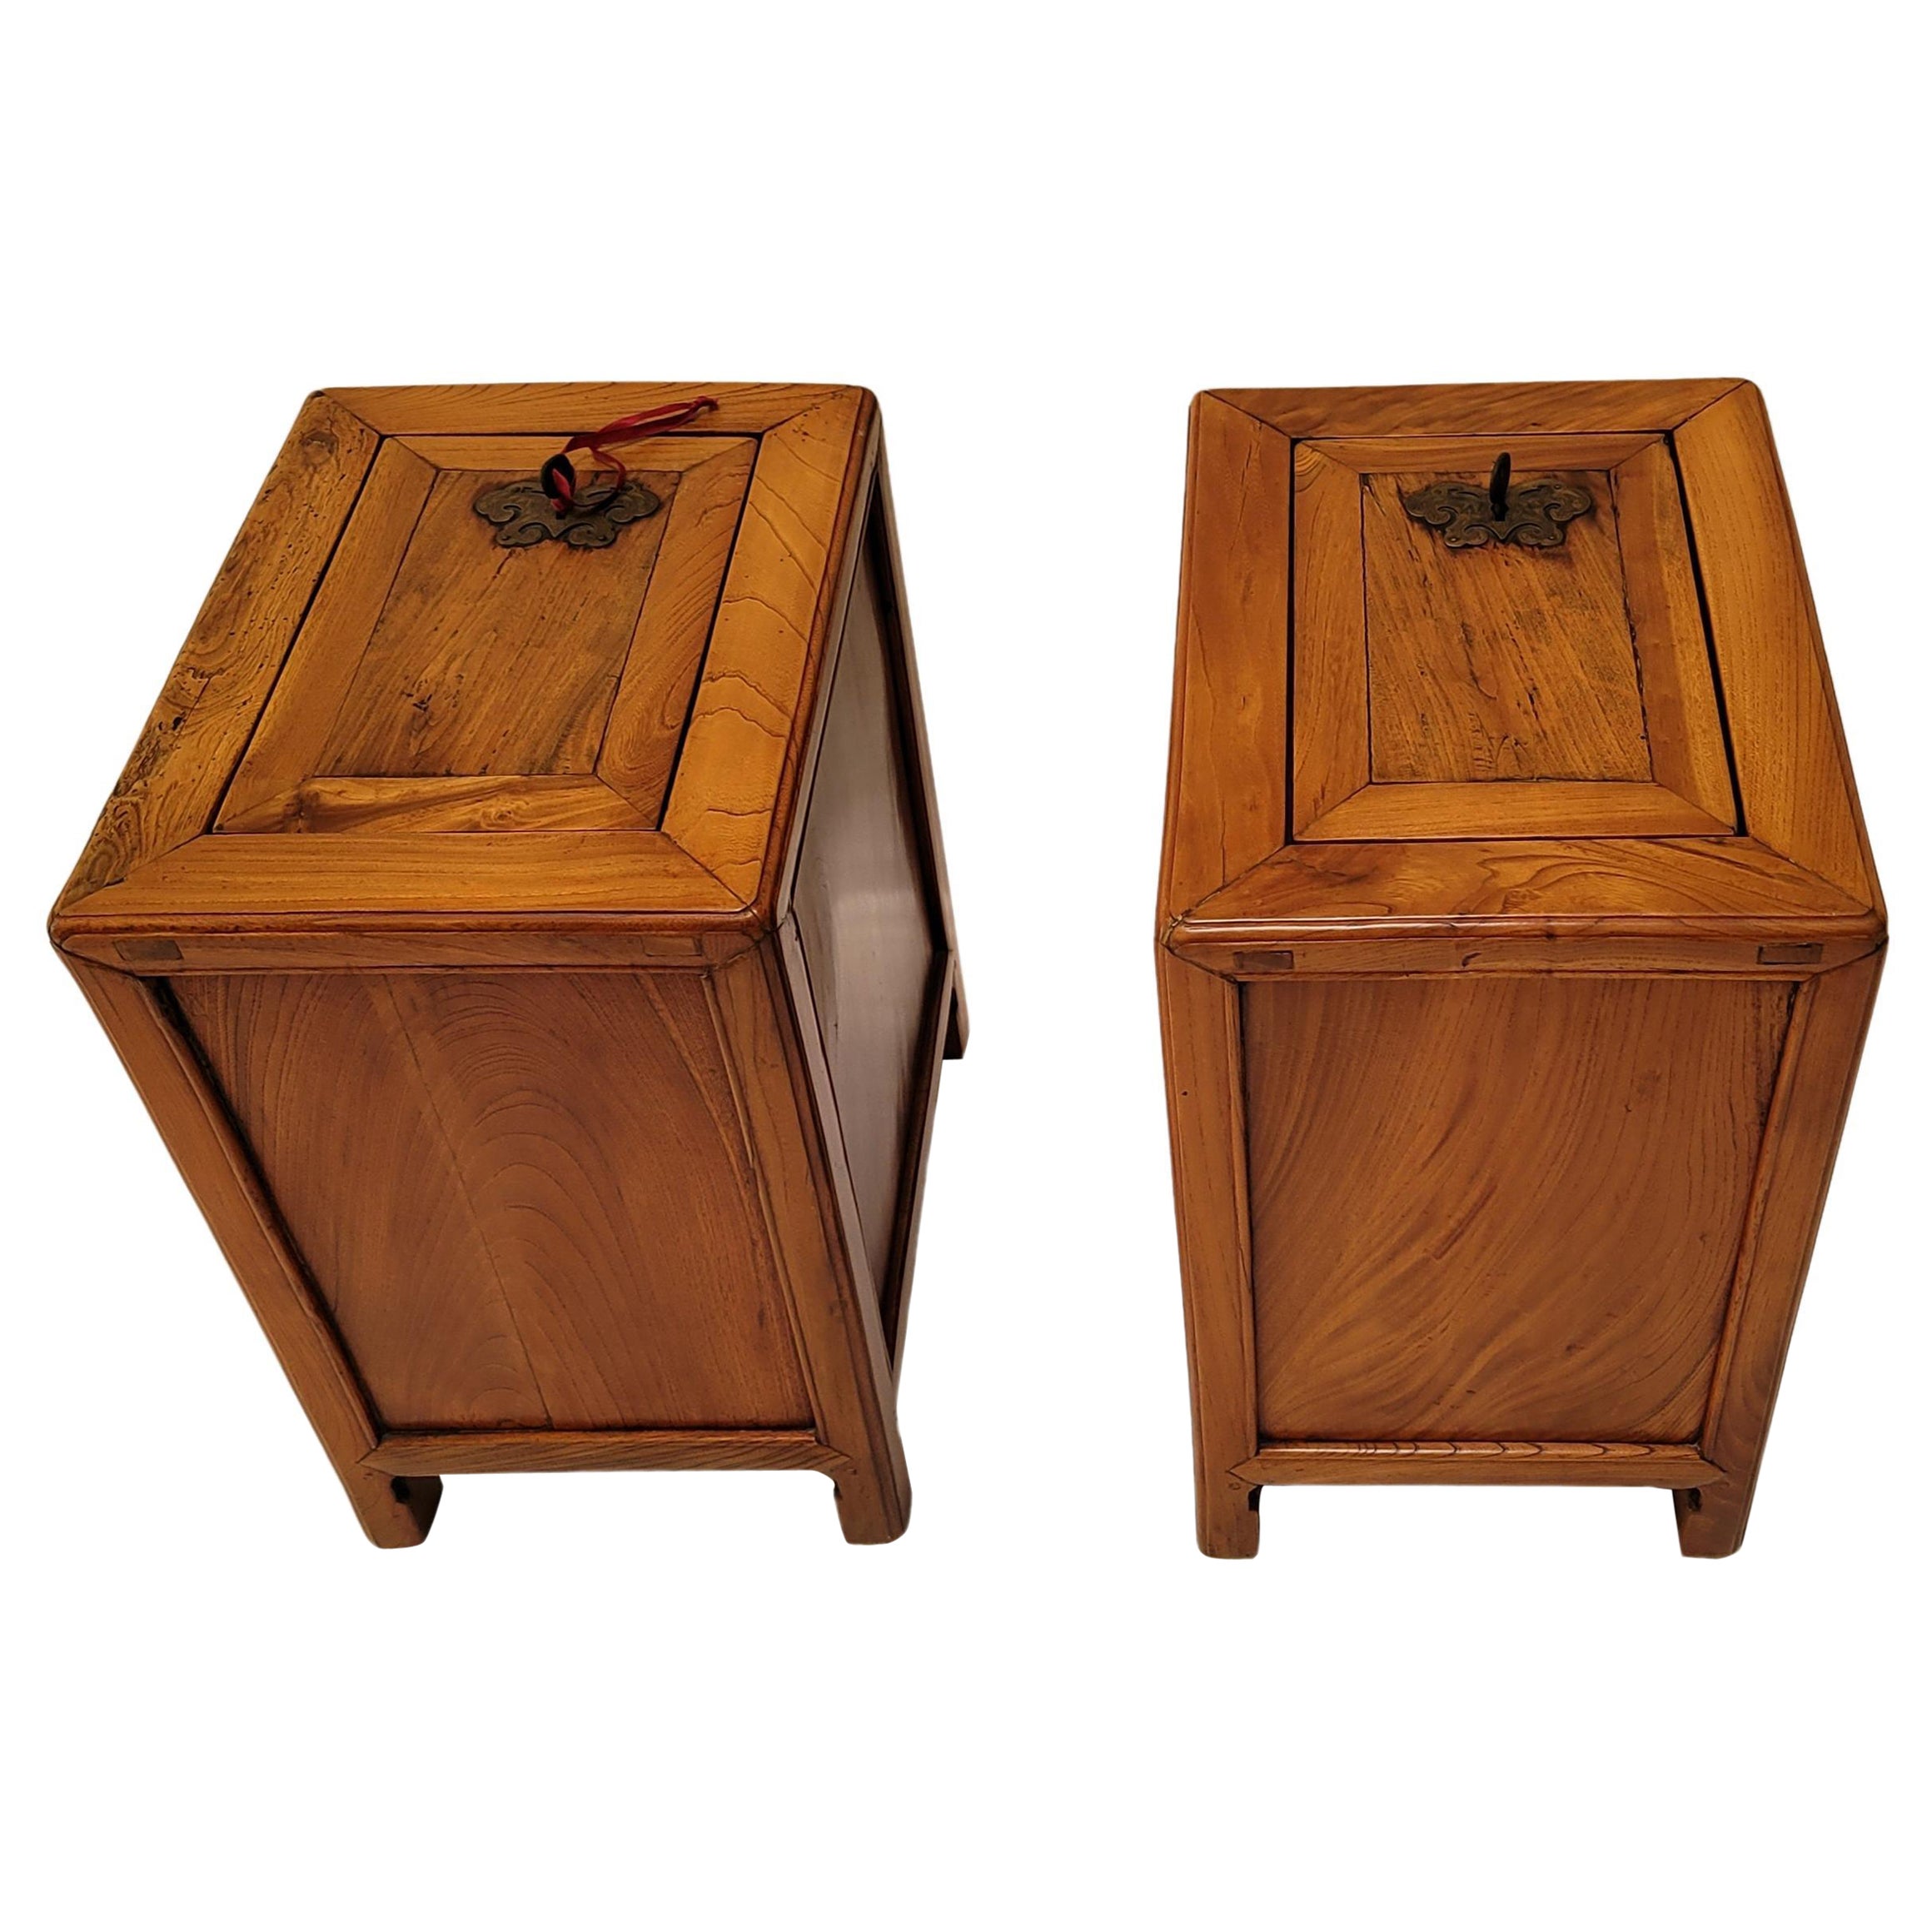 19th Century Pair of Money Chests For Sale